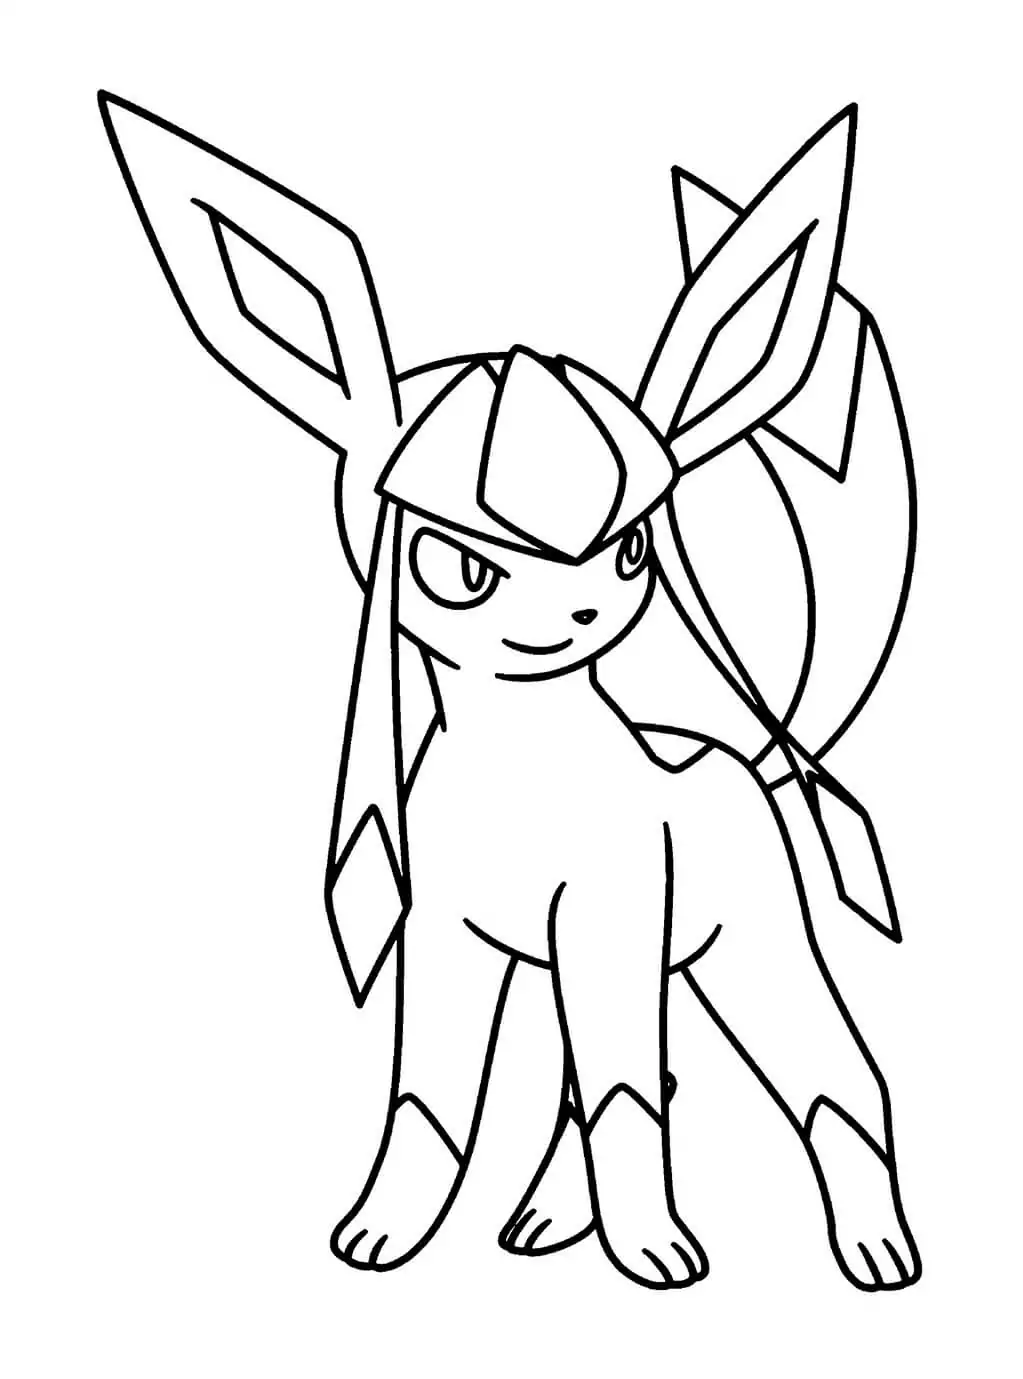 Glaceon 4